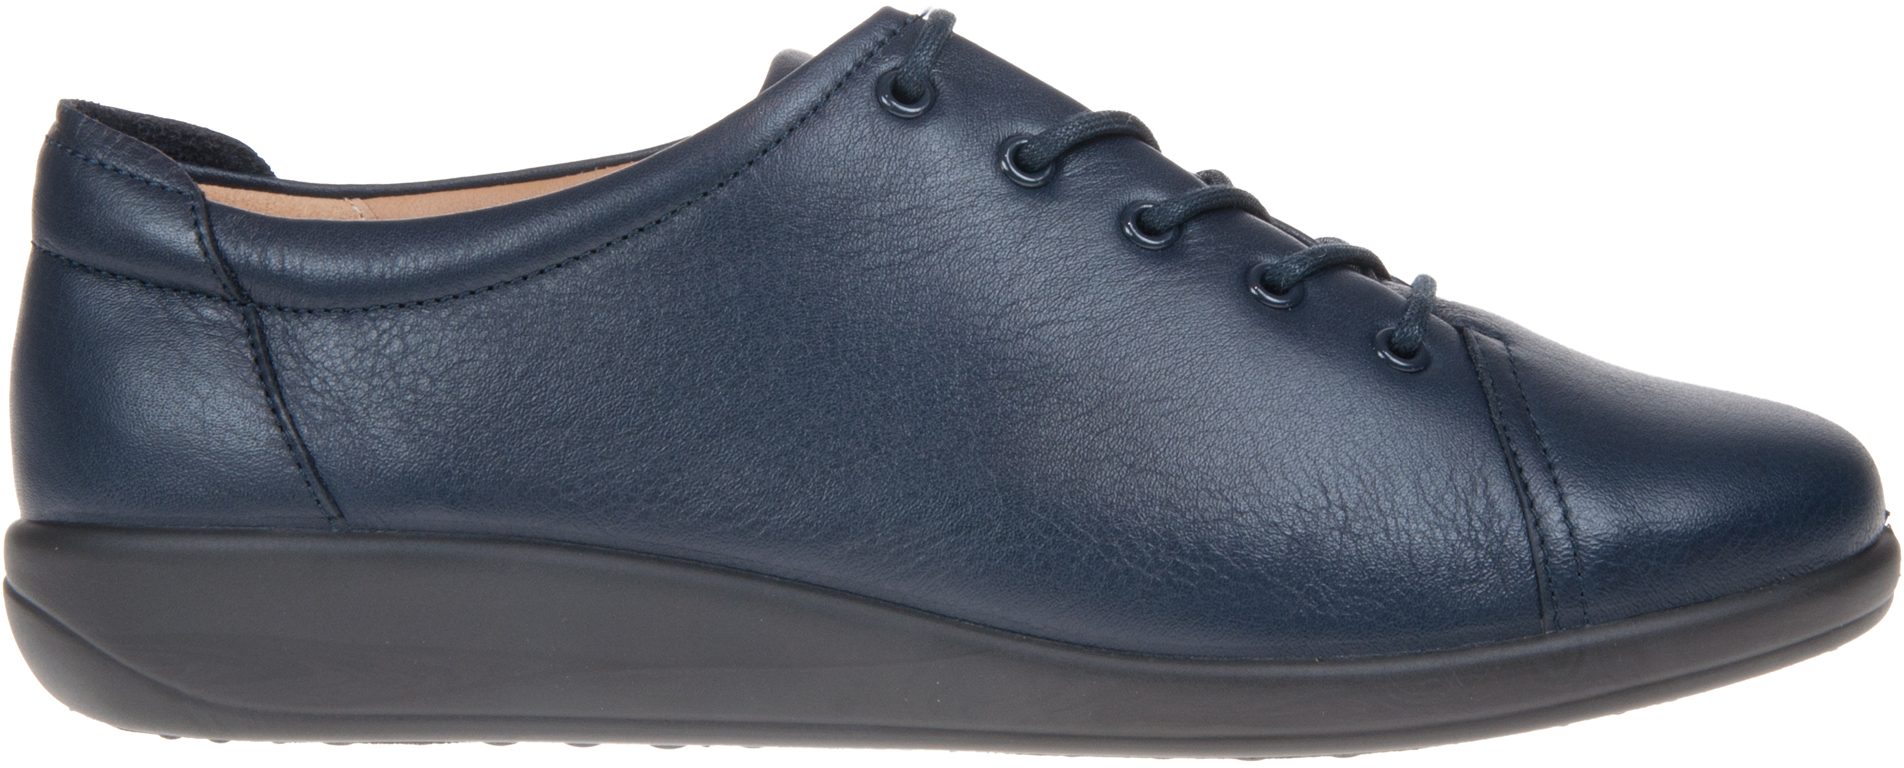 Hotter Dew Navy Leather DEWZZ2 - Everyday Shoes - Humphries Shoes